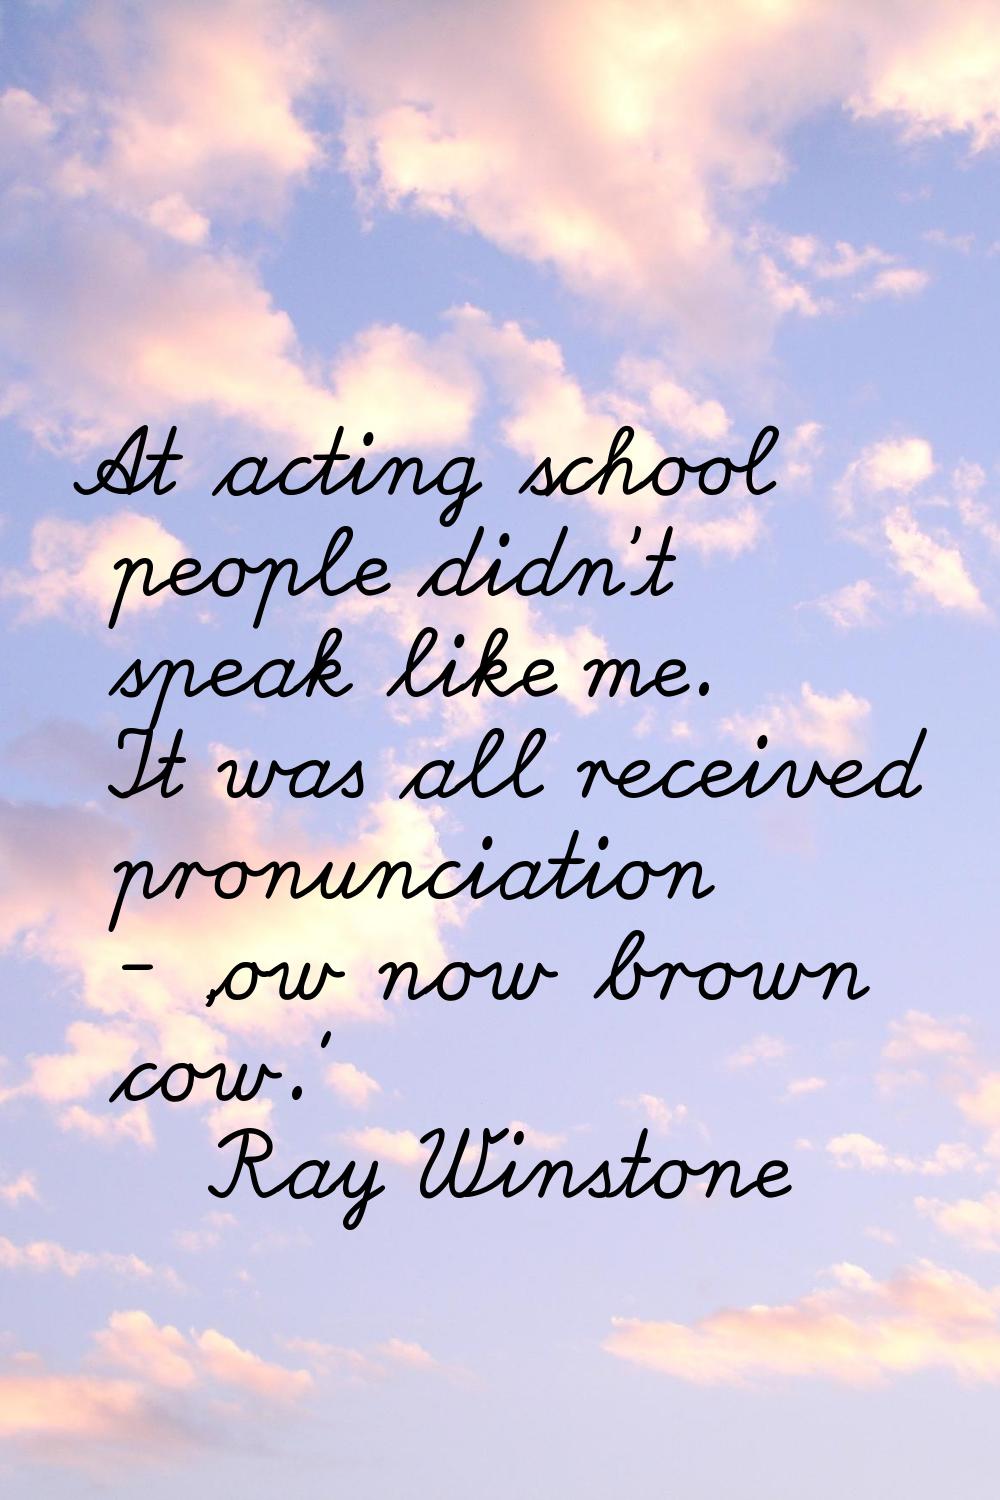 At acting school people didn't speak like me. It was all received pronunciation - 'ow now brown cow